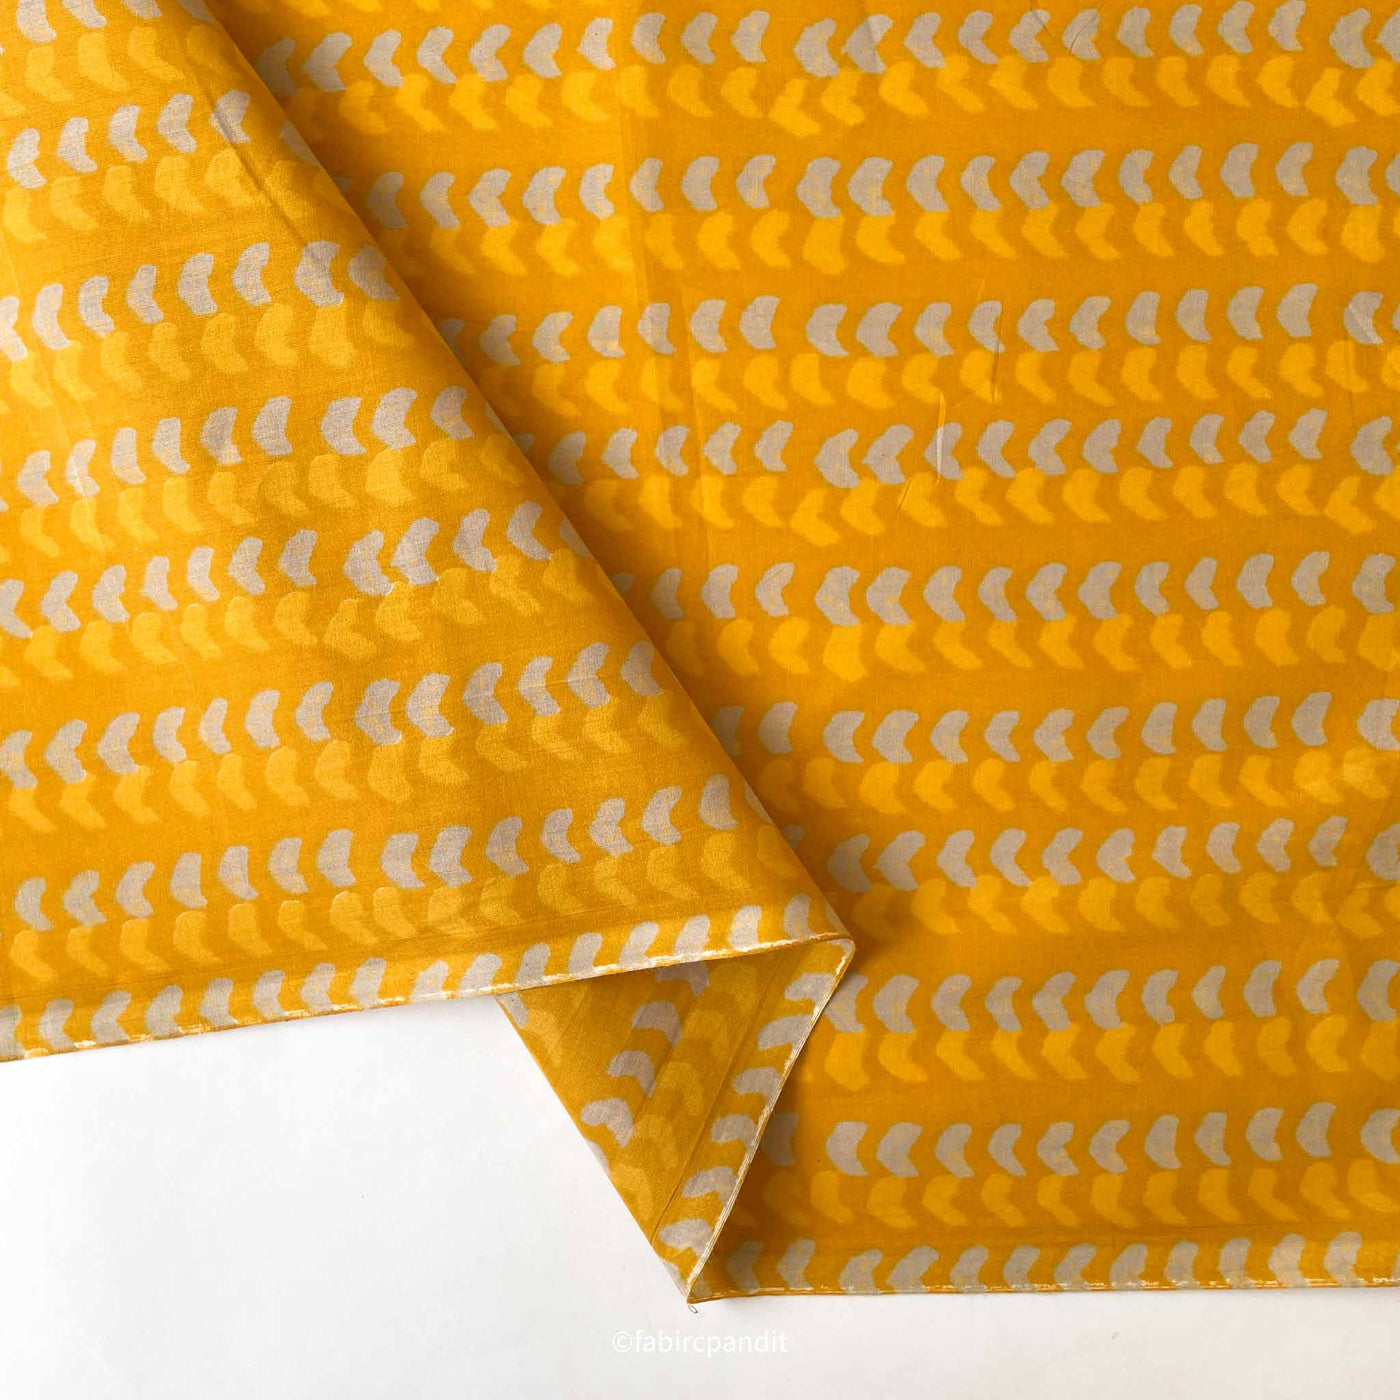 Fabric Pandit Fabric Dusty Yellow and Grey Geometric Stripes Hand Block Printed Pure Cotton Fabric (Width 43 inches)